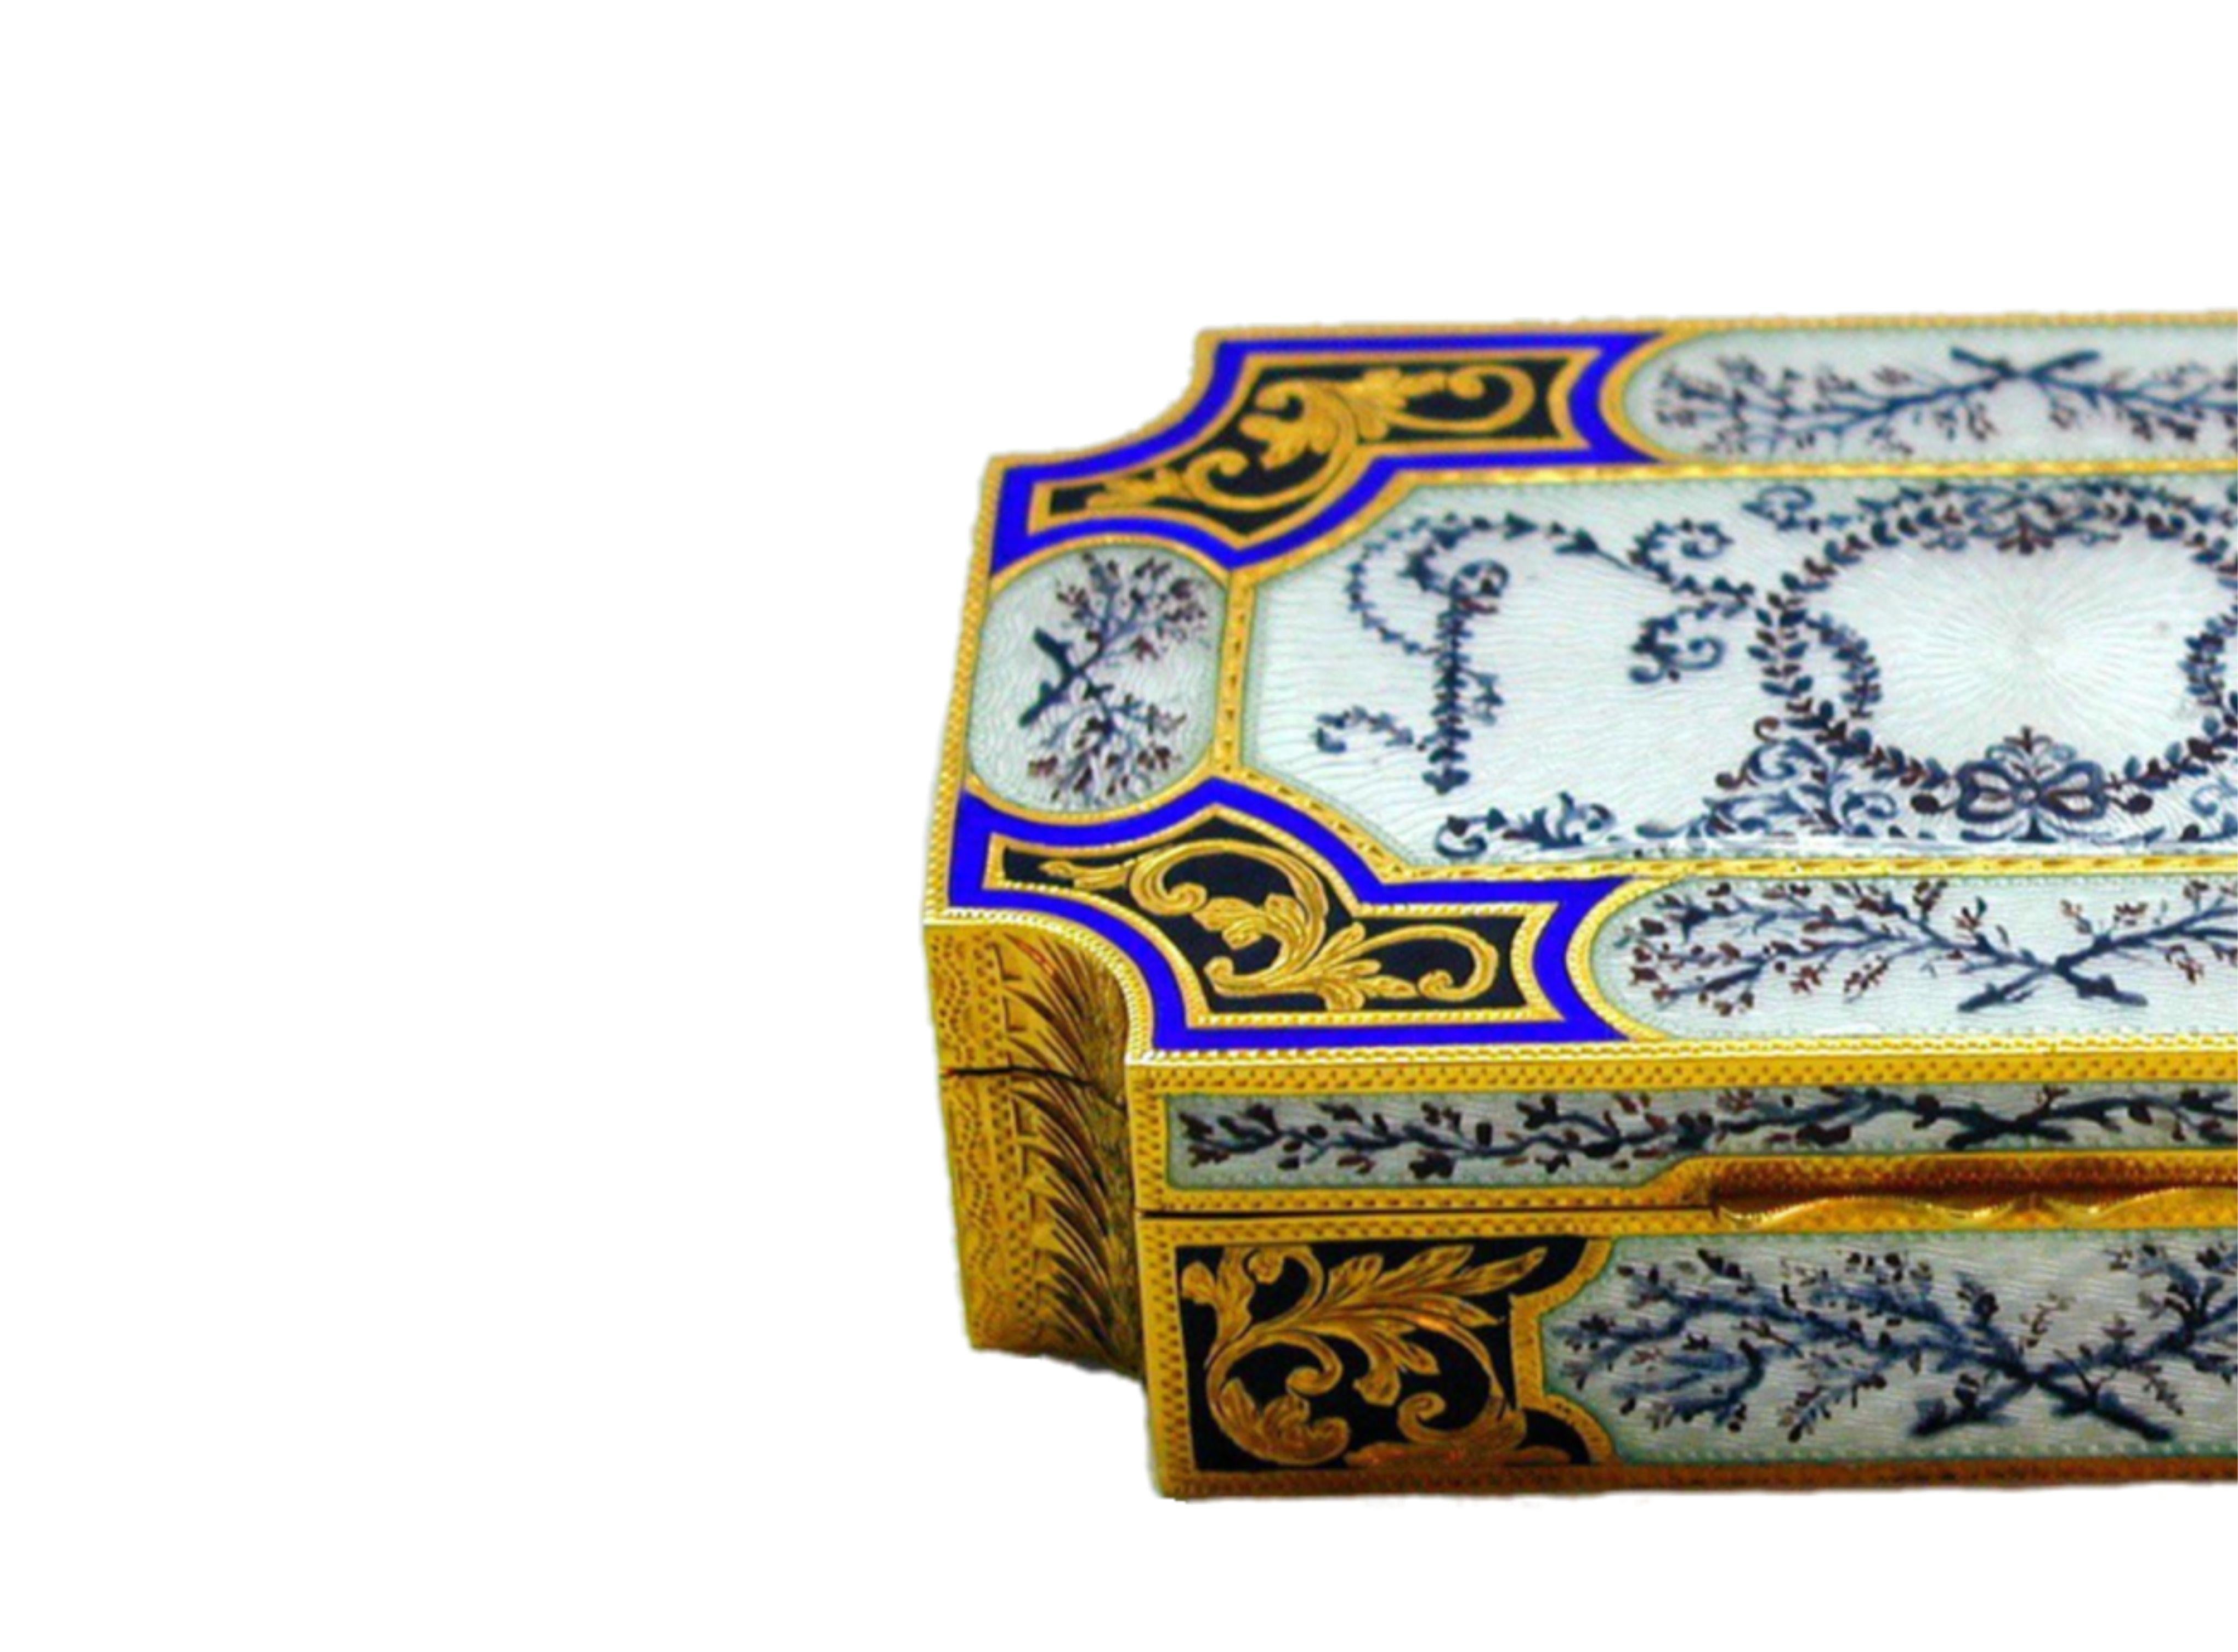 Fired Sterling Silver Jewel Box Fire Enamel Guilloché Hand Painted, Engraved Salimbeni